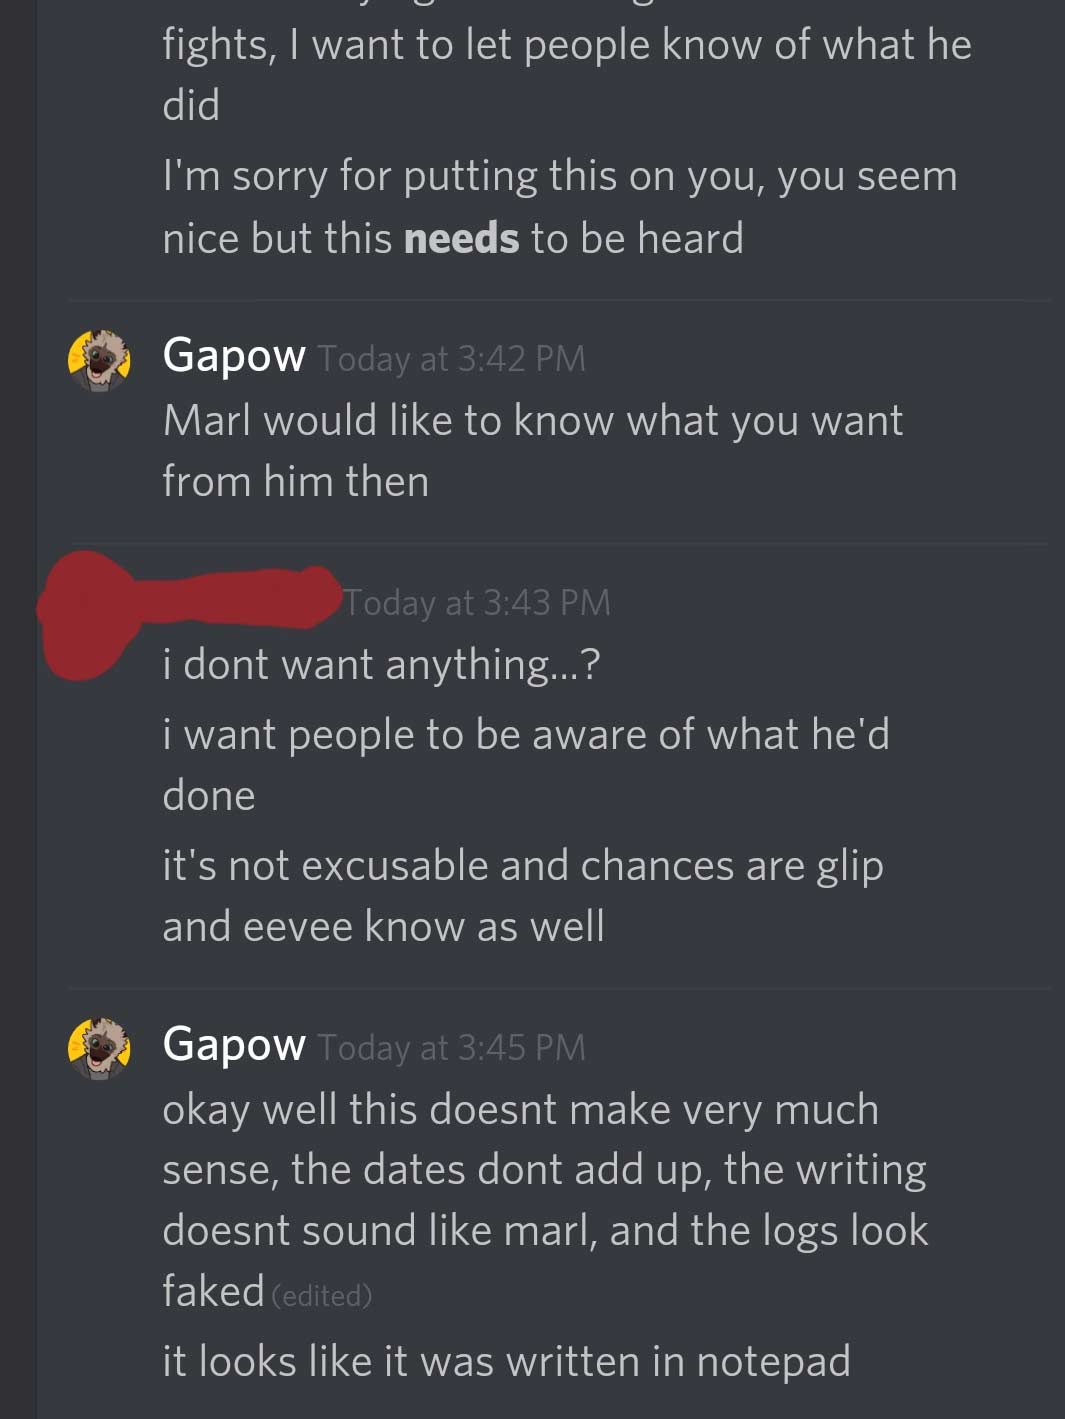 Discord Conversation that Reads: I want people to know what he did. I'm sorry for putting this on you, you seem nice but this needs to be heard. Gabs responds: Marl would like to know what you want from him then. Chilimac Responds: I don't want anything? I want people to be aware of what he'd done. It's not excusable and chances are Glip and Eevee know as well. Gabs response: Okay well this dosen't make much sense, the dates dont add up, the writing doesn't sound like marl and the logs look faked. it looks like it was written in notepad